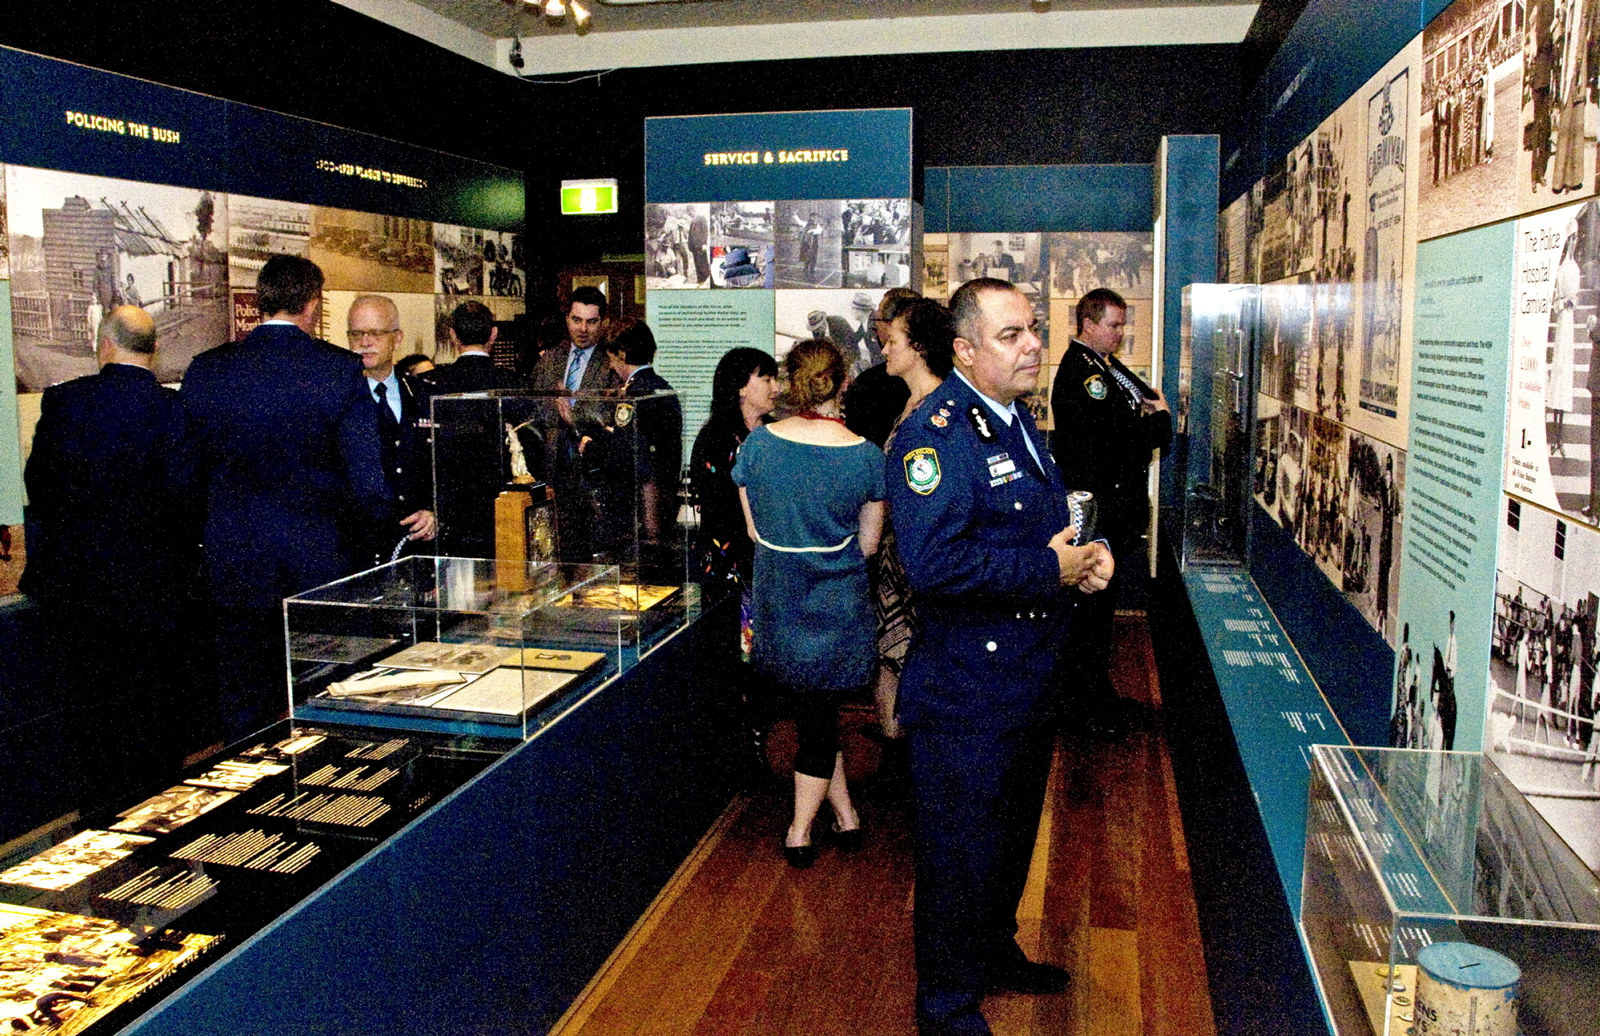 Deputy Commissioner Field Operations or NSW Police, Nick Kaldas at the Justice and Police Museum